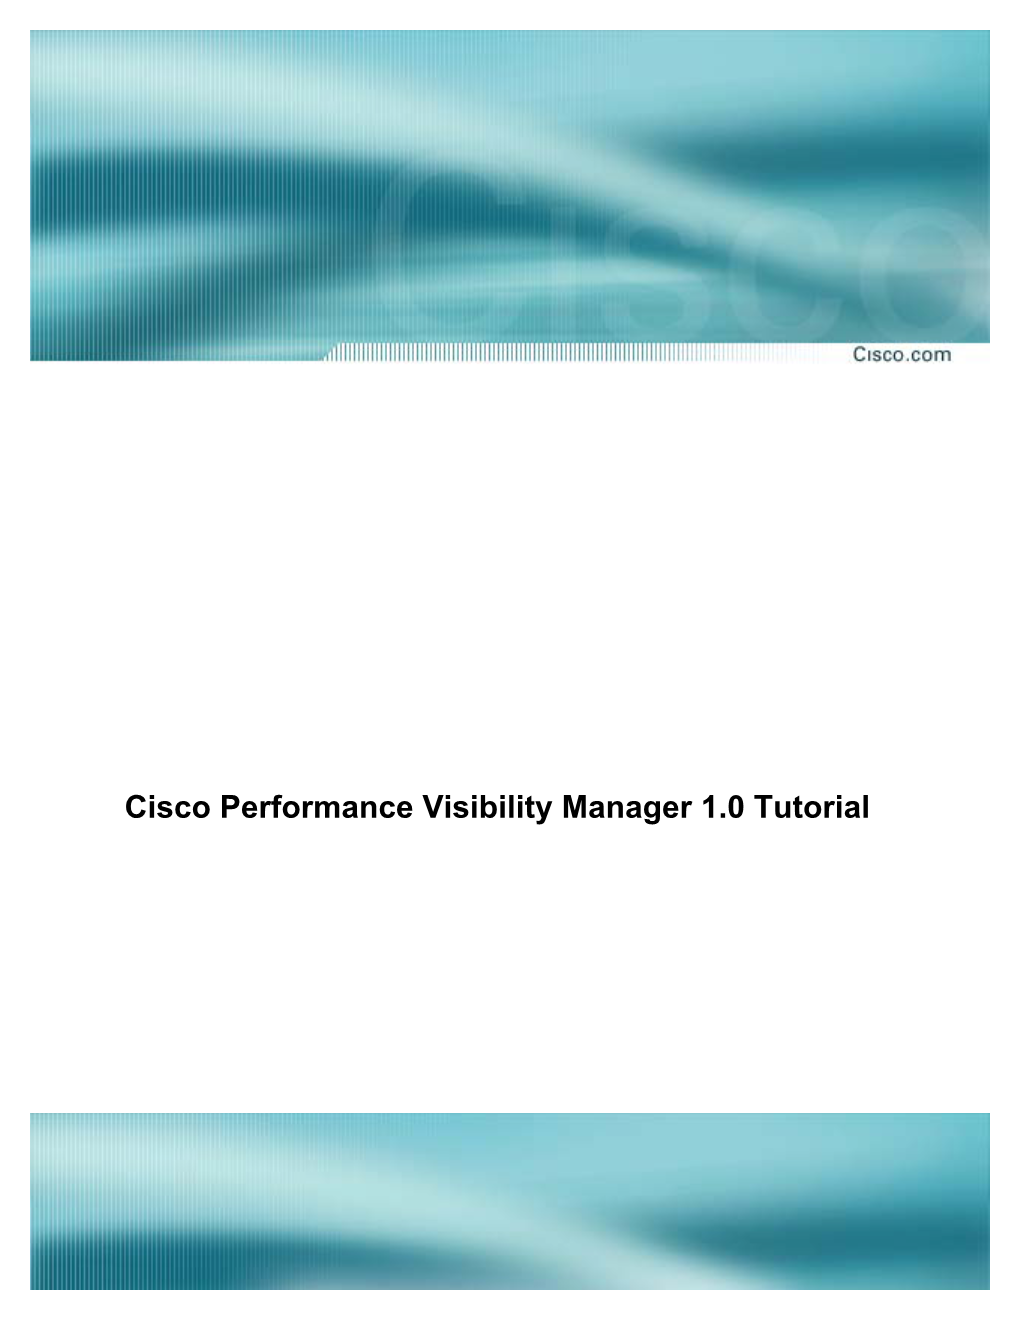 Cisco Performance Visibility Manager 1.0 Tutorial